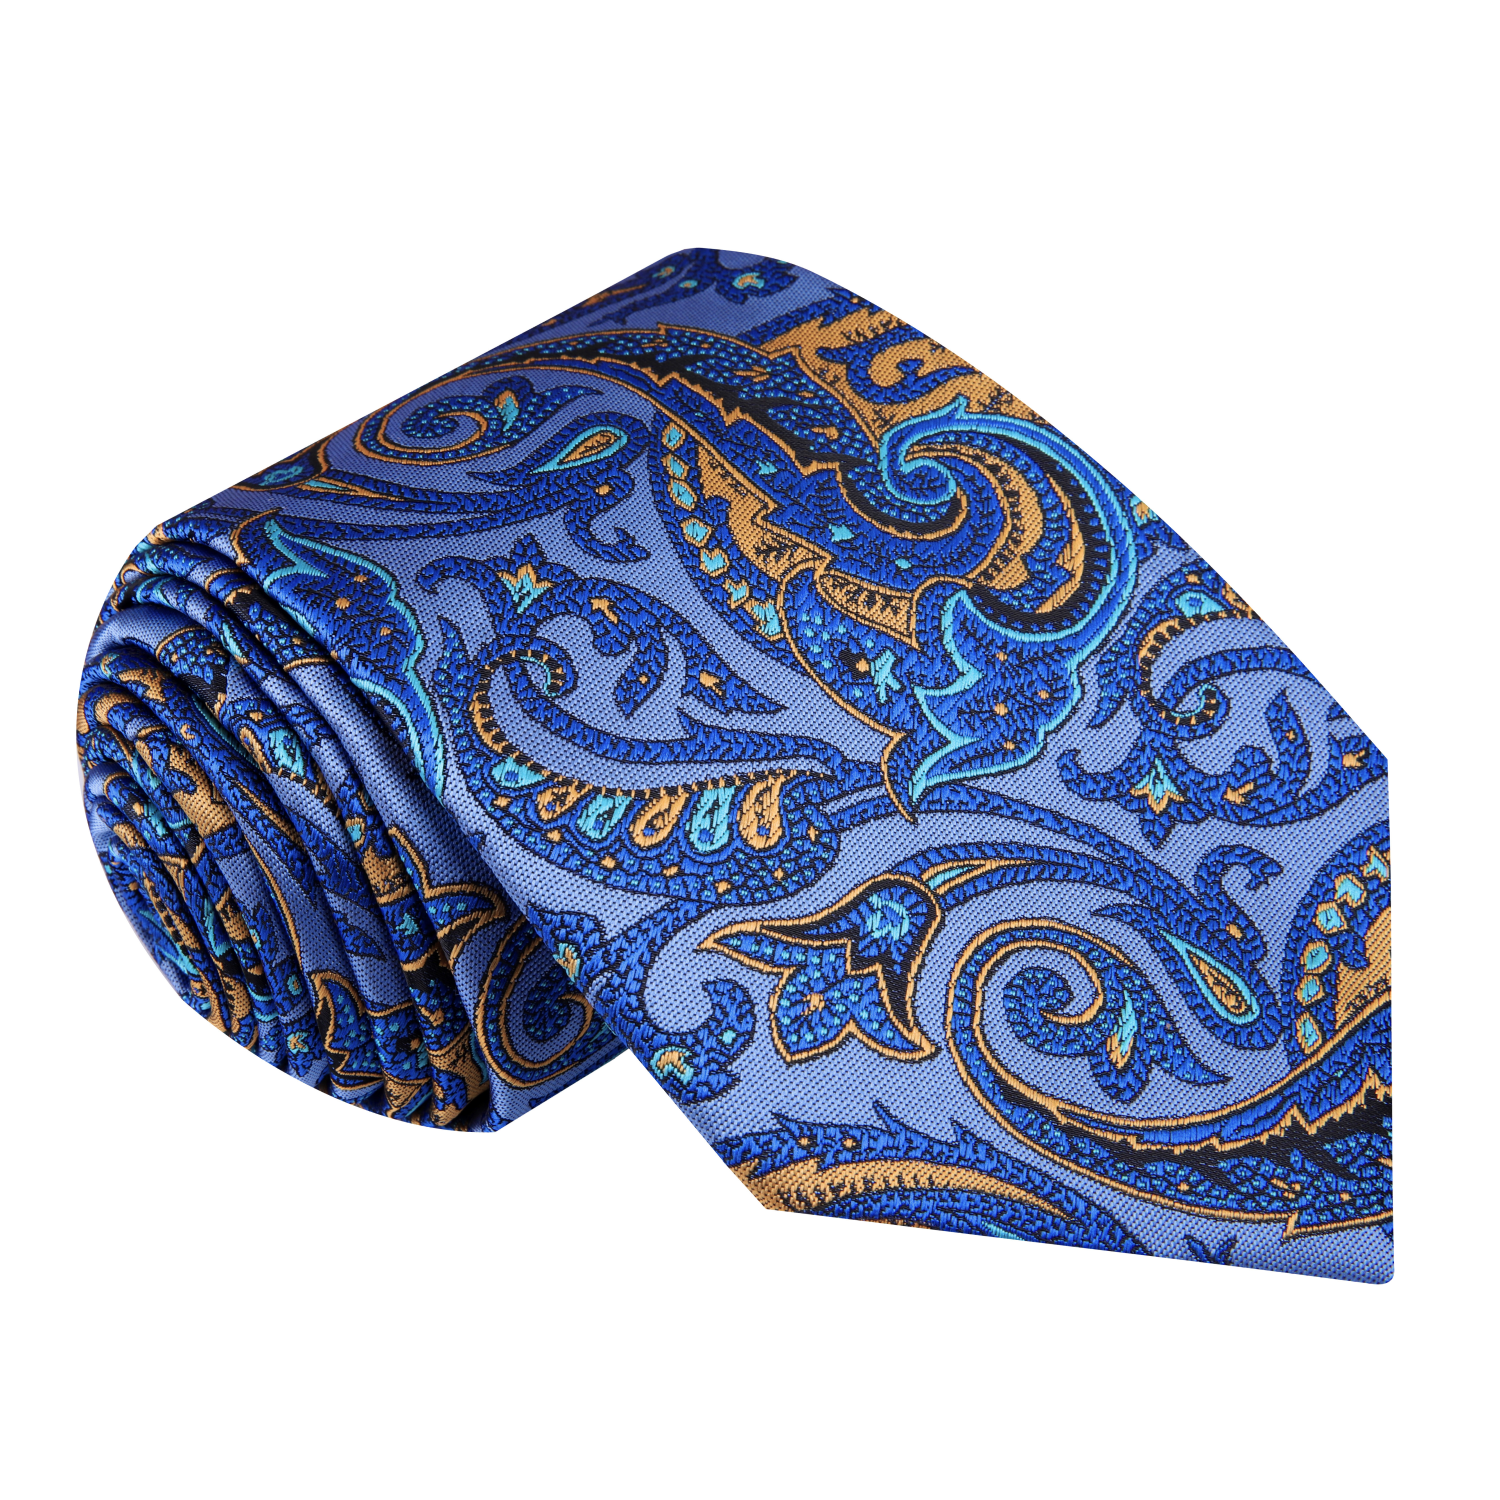 View 2: Blue, Yellow Paisley Tie 